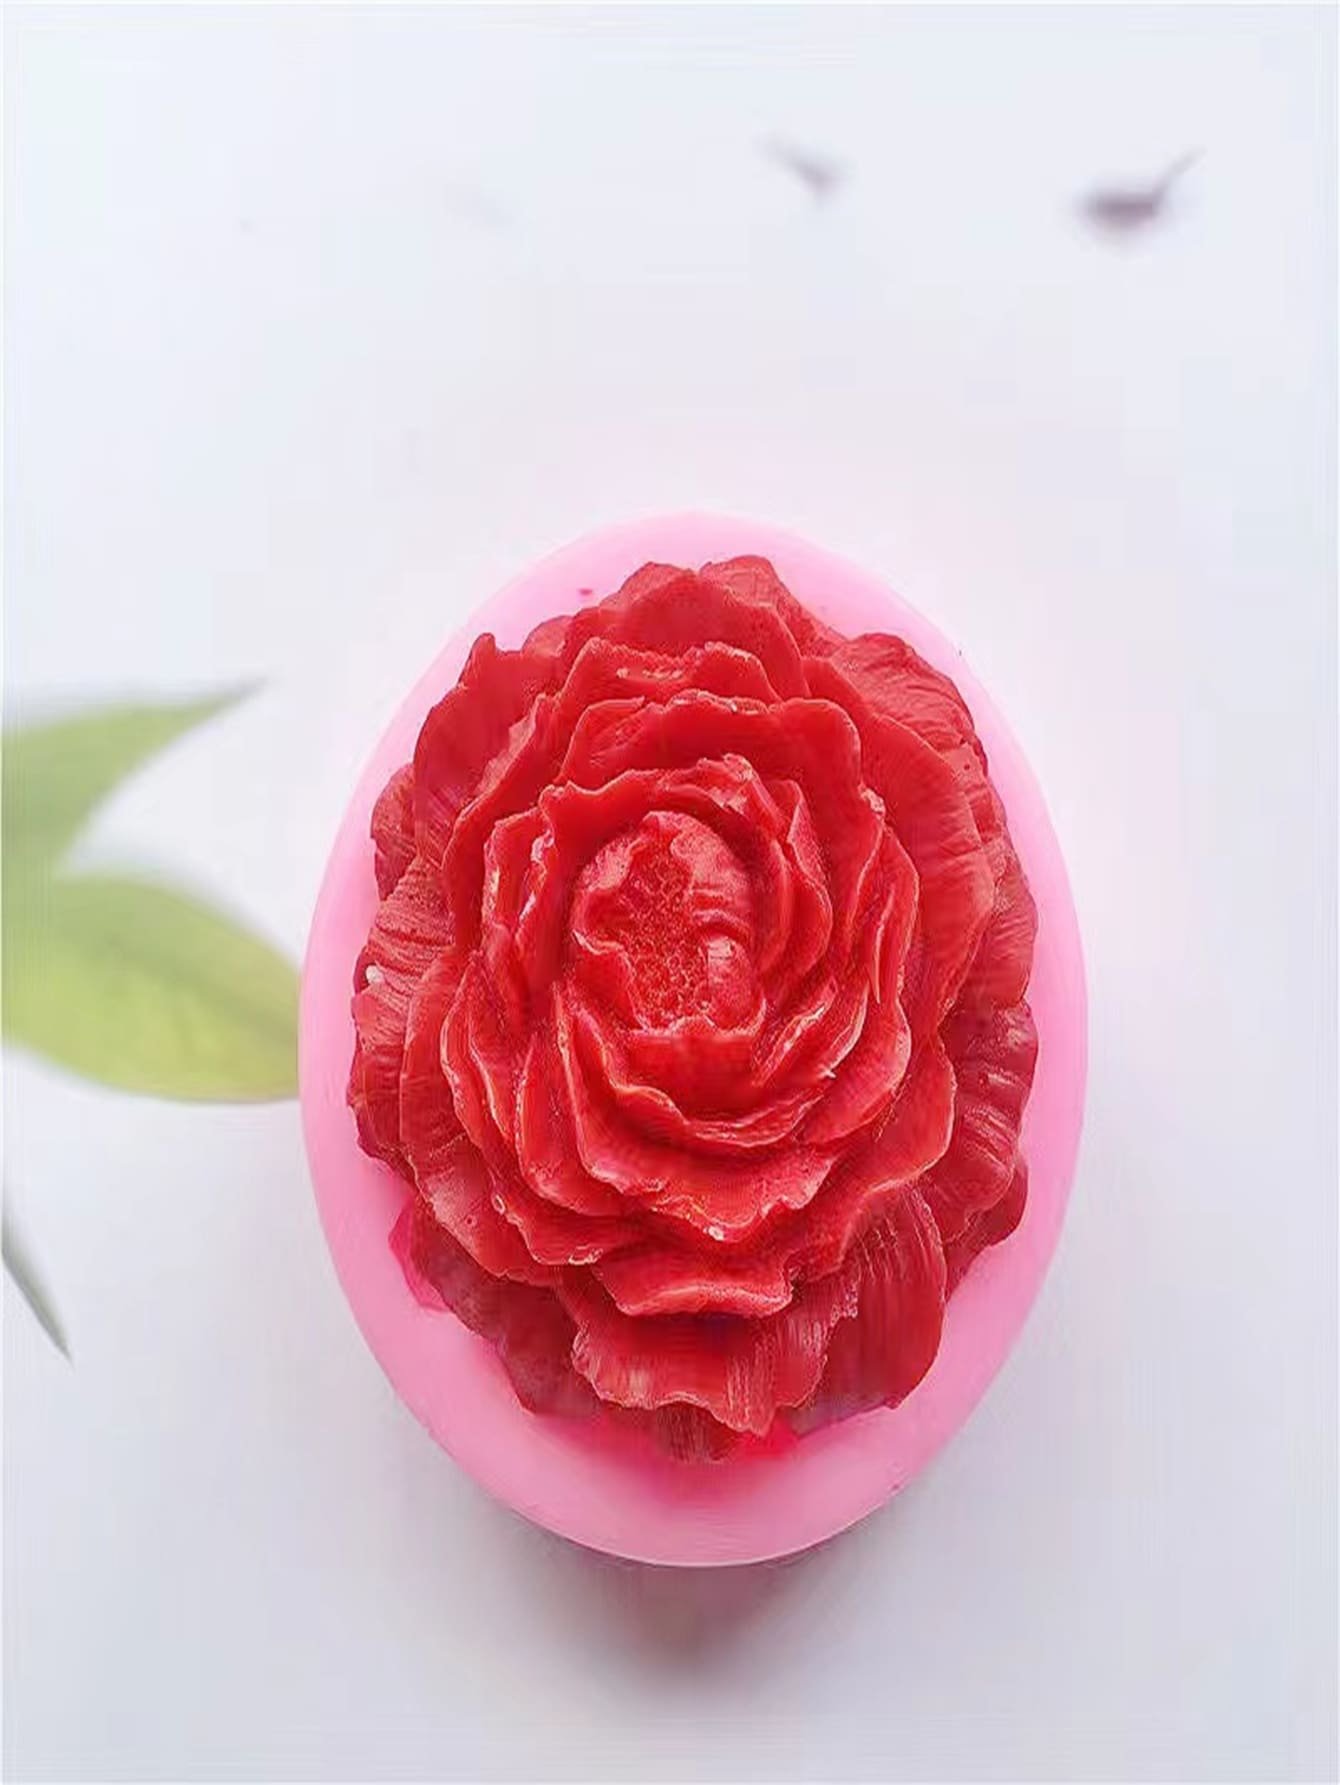 Rose Bud Big Flower Silicone Mold Soap Molds 3D Rose Bud Mold Baking Flower  Mold Candle Soap Flower Bud Rose Mold Silicone Rose Molding 